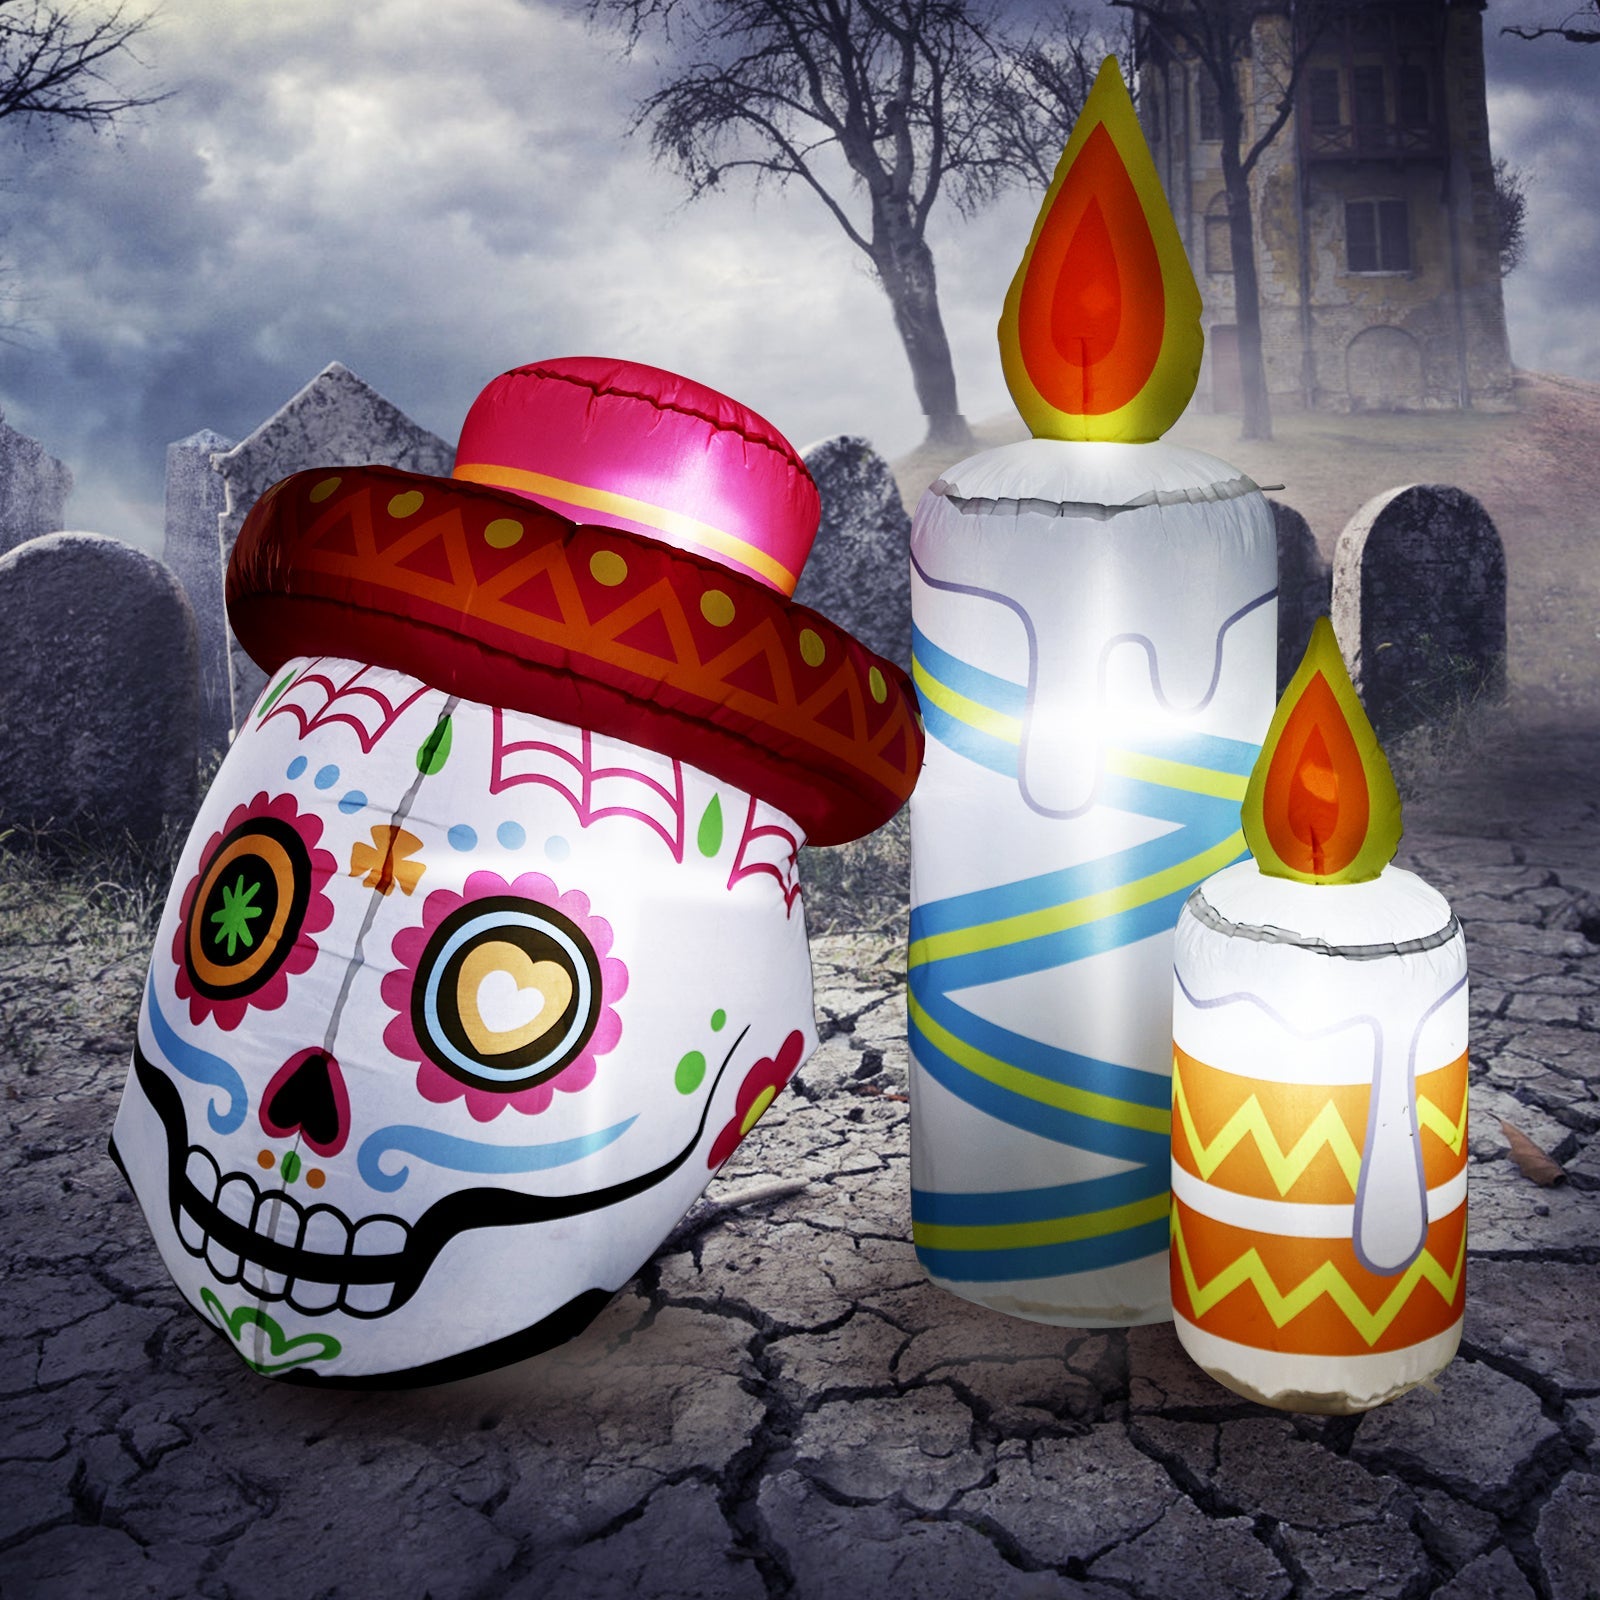 4 Ft Day of the Dead Inflatable Skull with Candles